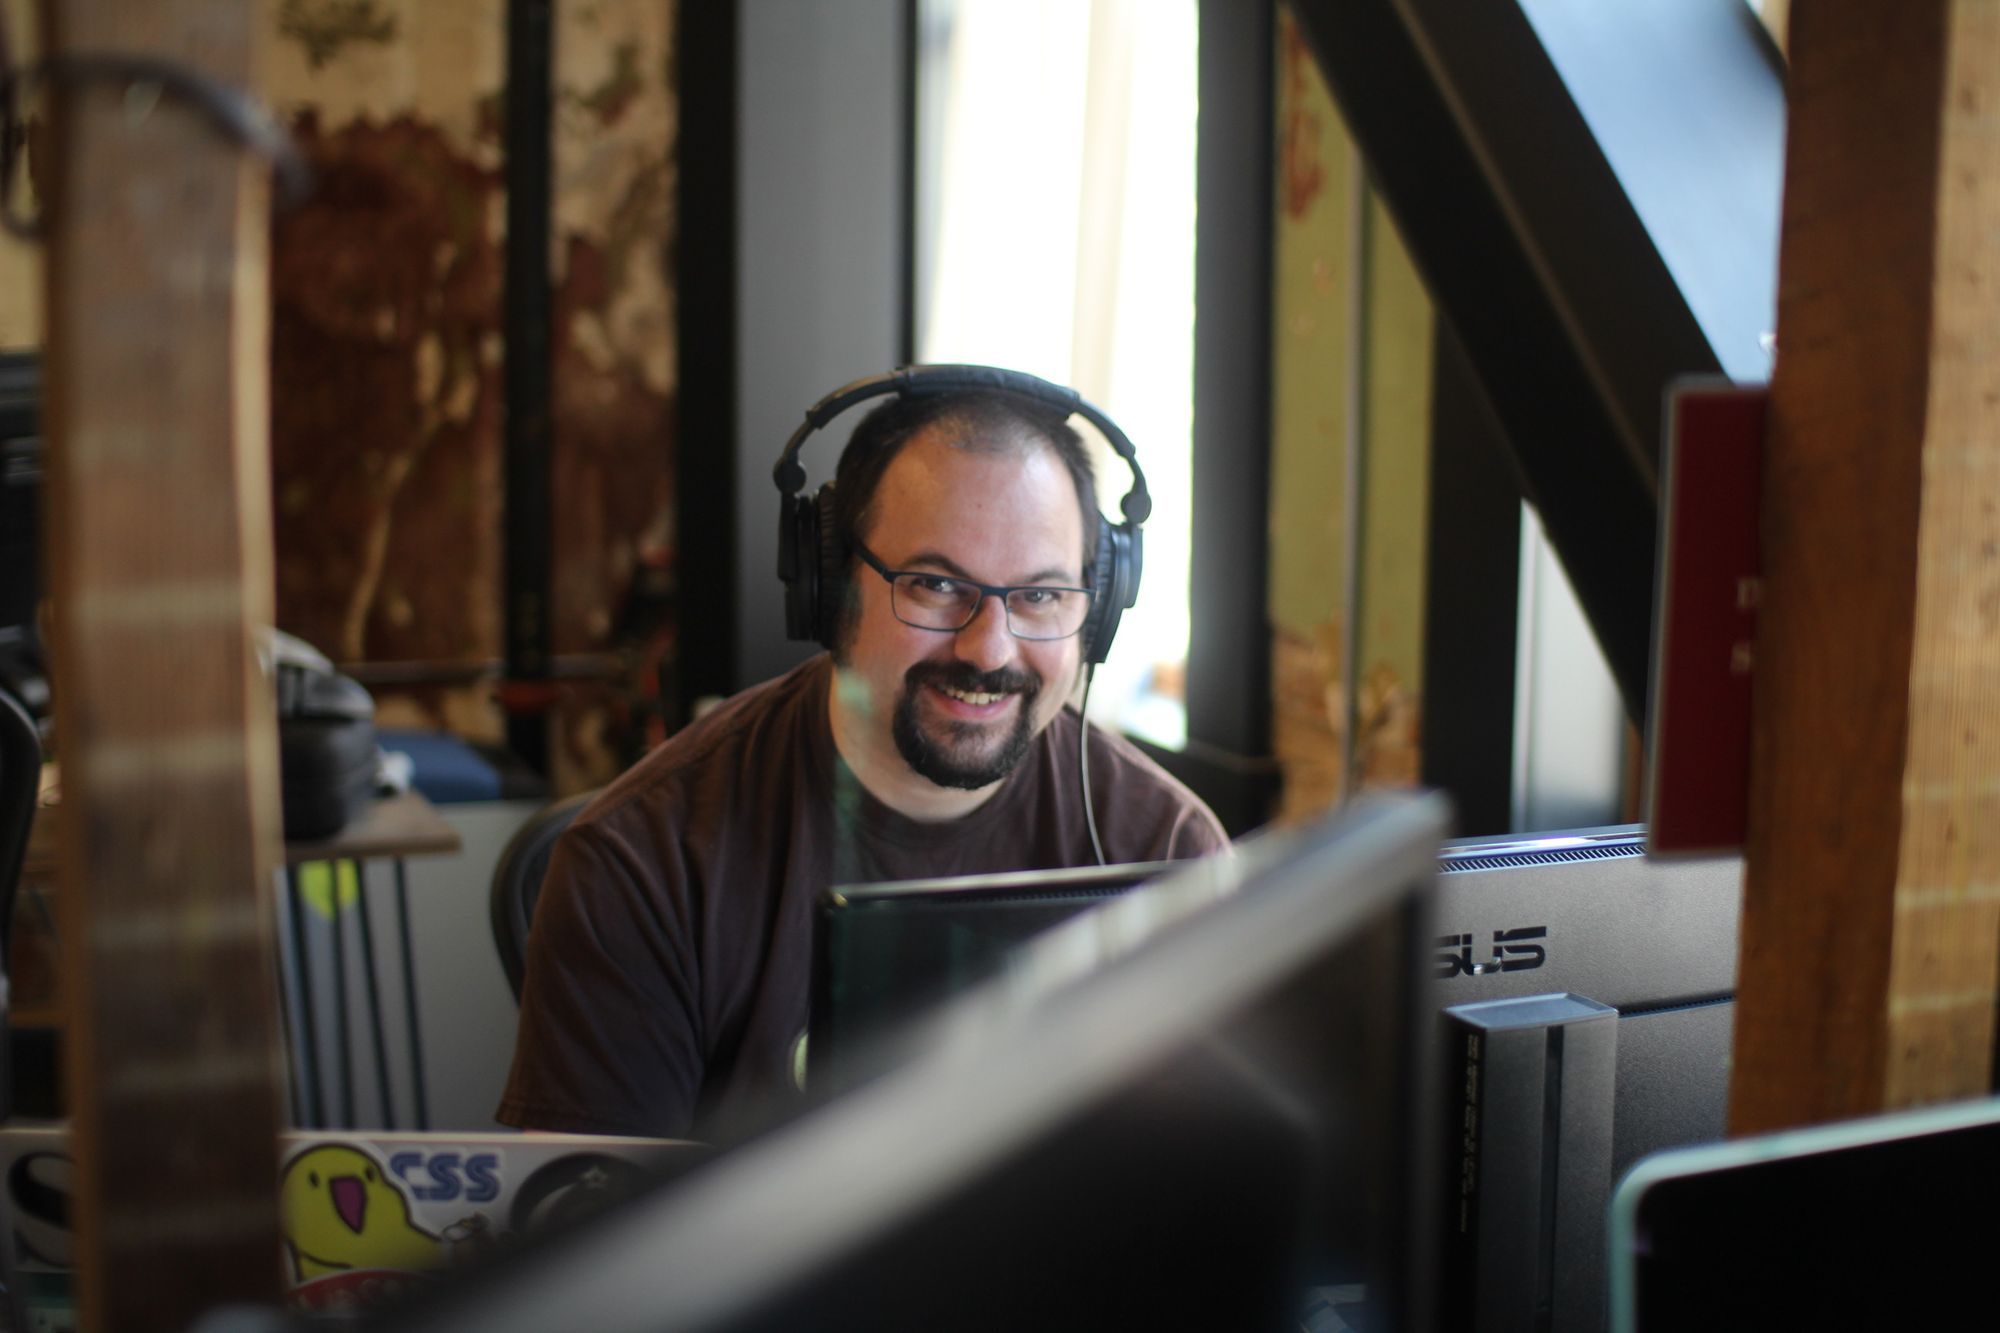 Scott at his desk, wearing headphones and smiling.